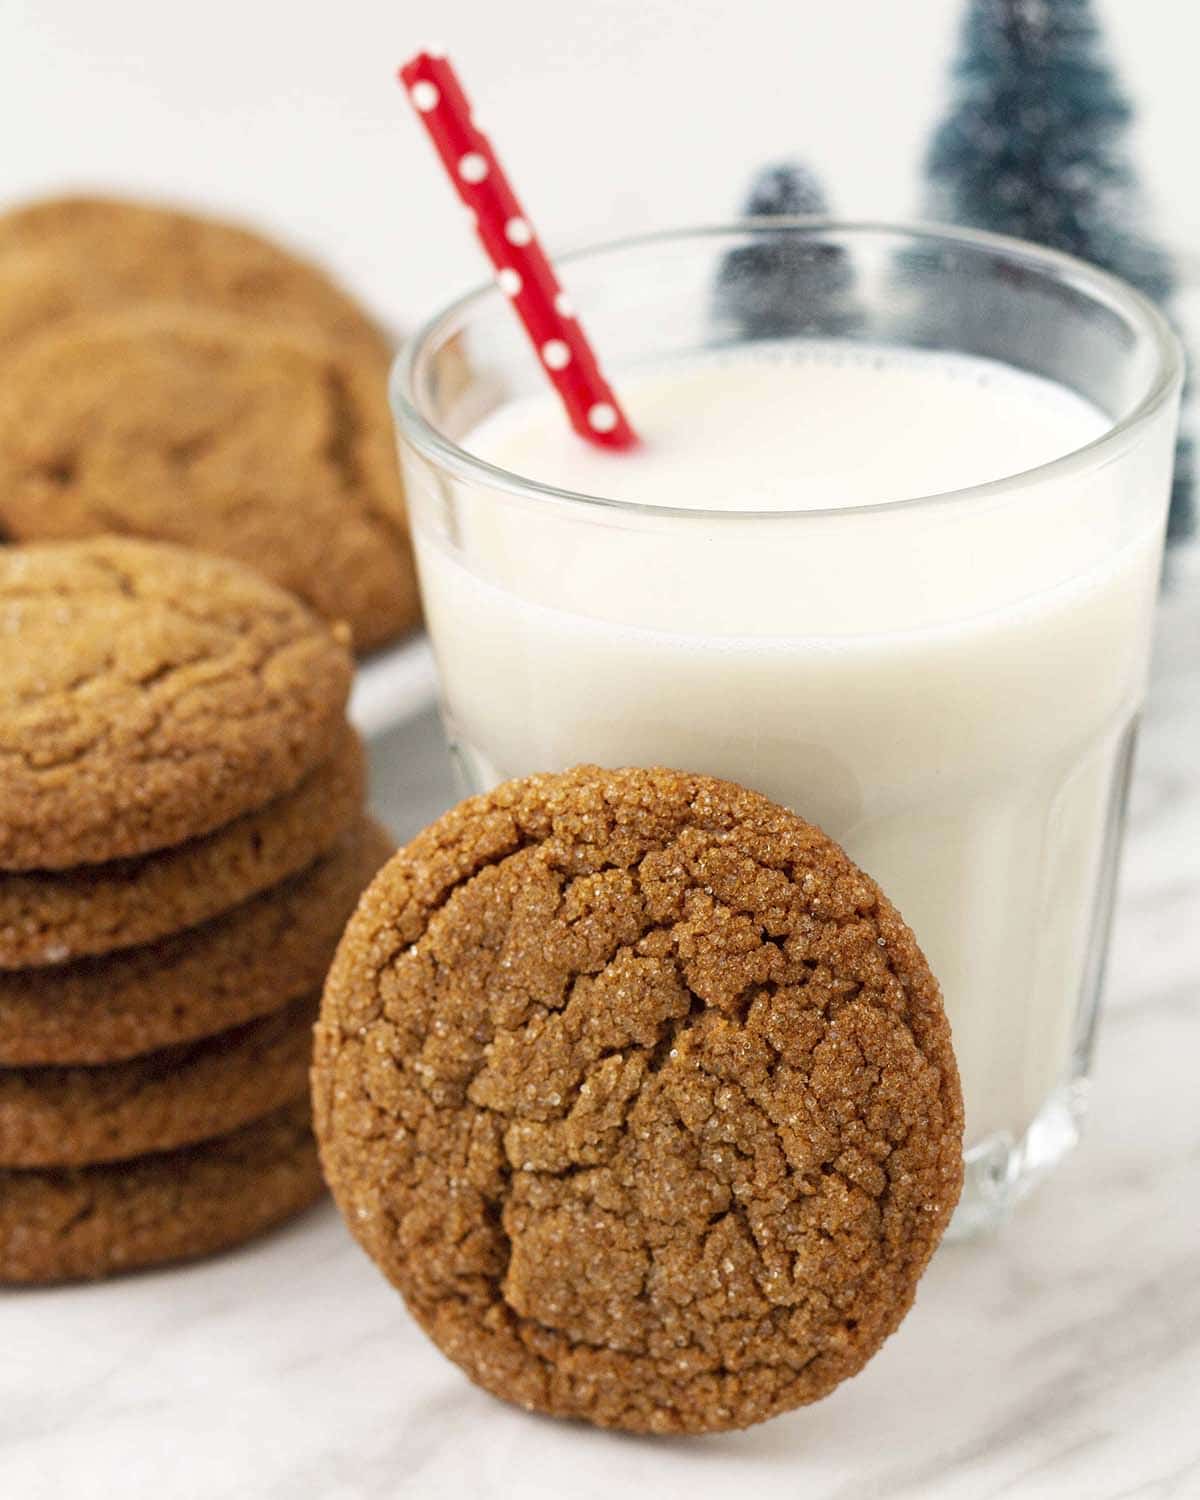 A glass of milk with a red straw, a molasses ginger cookies is leaning on it, more cookies sit in the background.